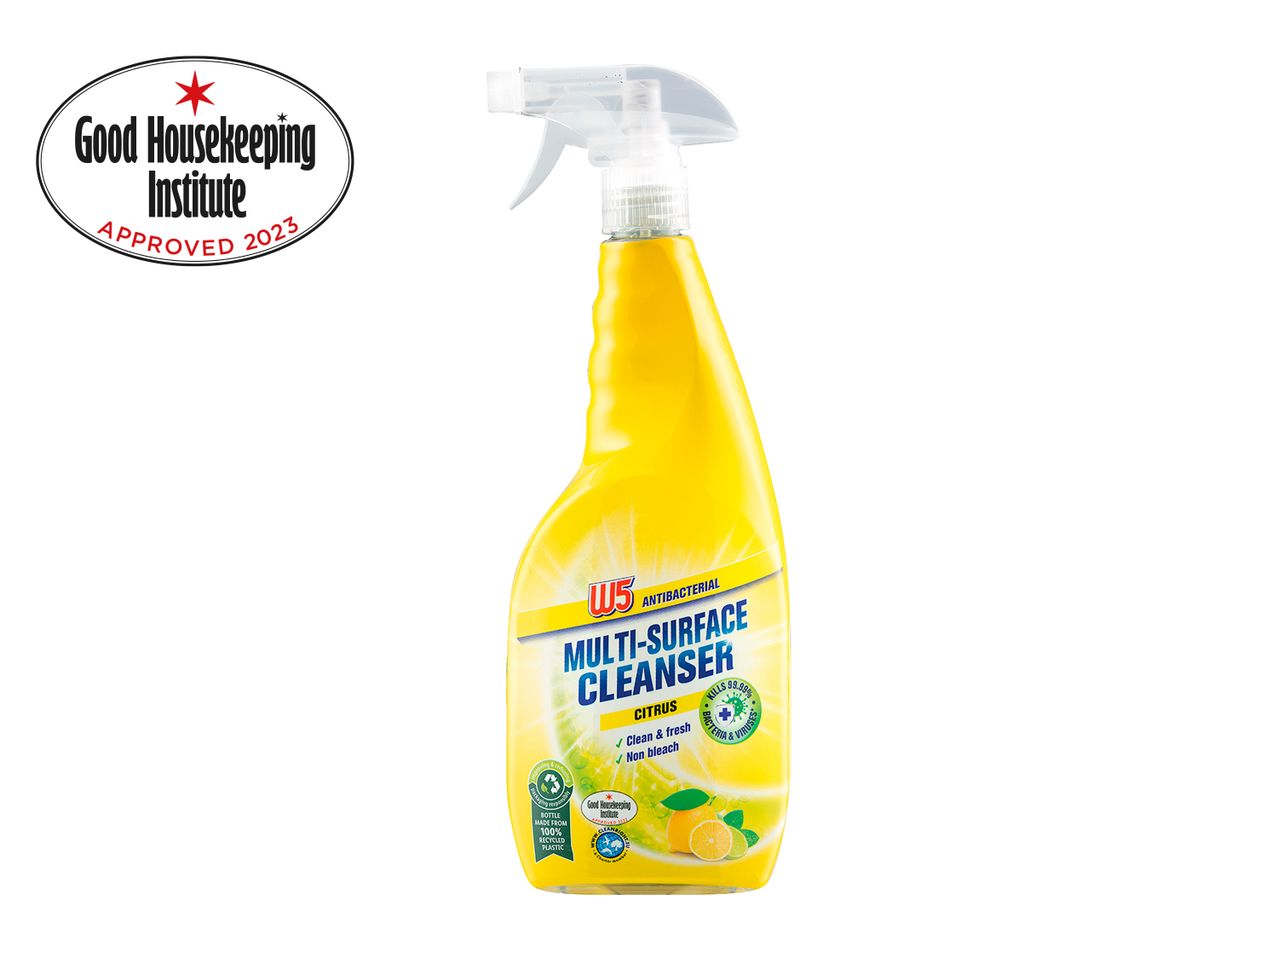 Go to full screen view: W5 Antibacterial Multi-Action Cleaner - Image 1